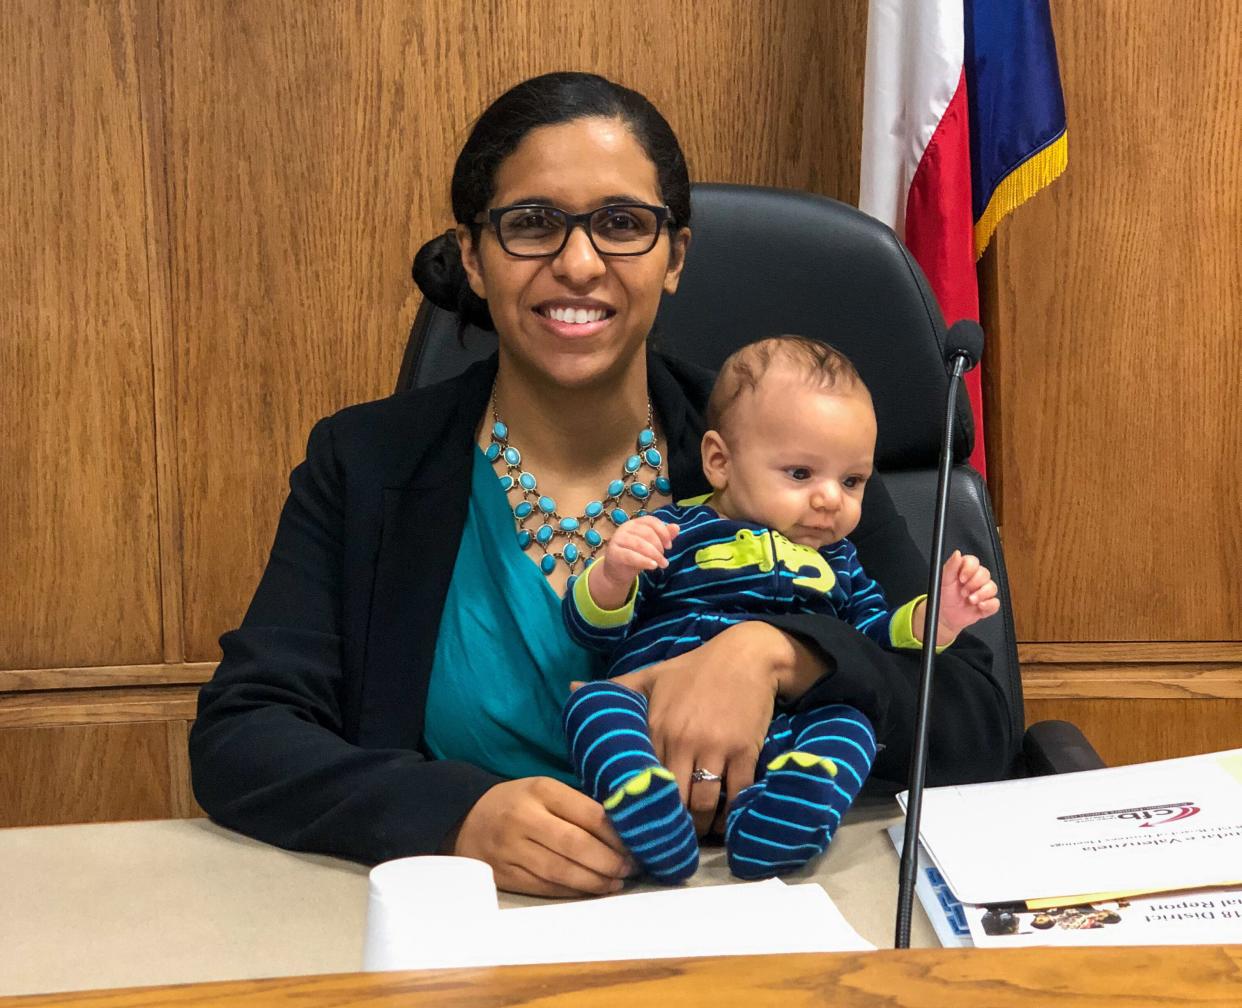 Valenzuela at a Carrollton-Farmers Branch school board meeting in August 2019 with her baby boy. (Photo: Candace Valenzuela)